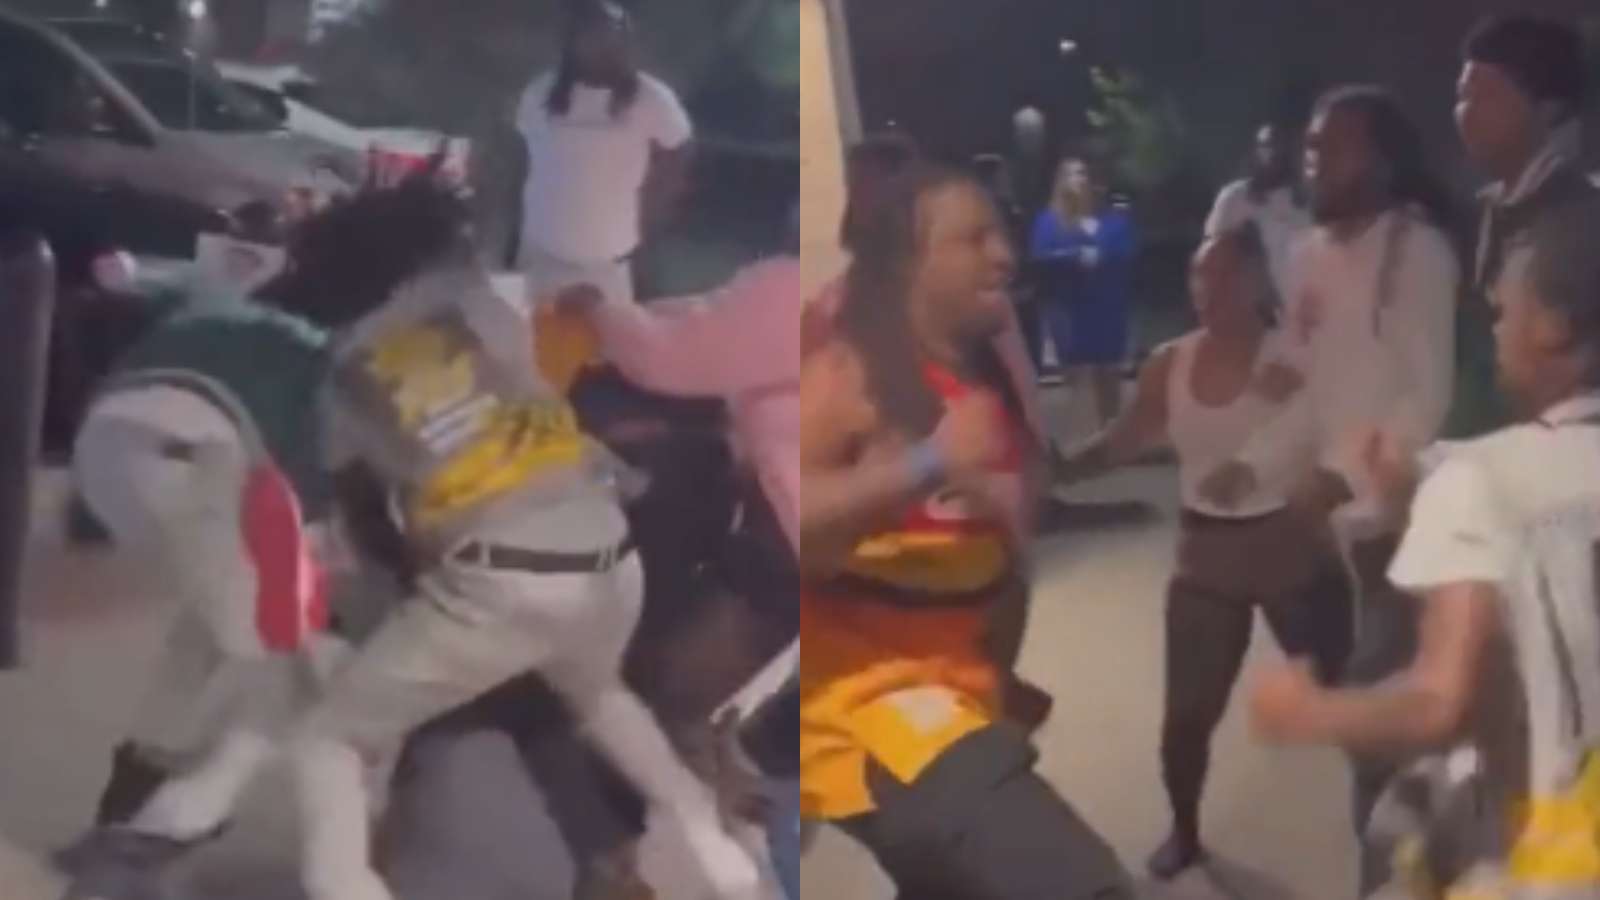 Man fights eight people at once in viral brawl